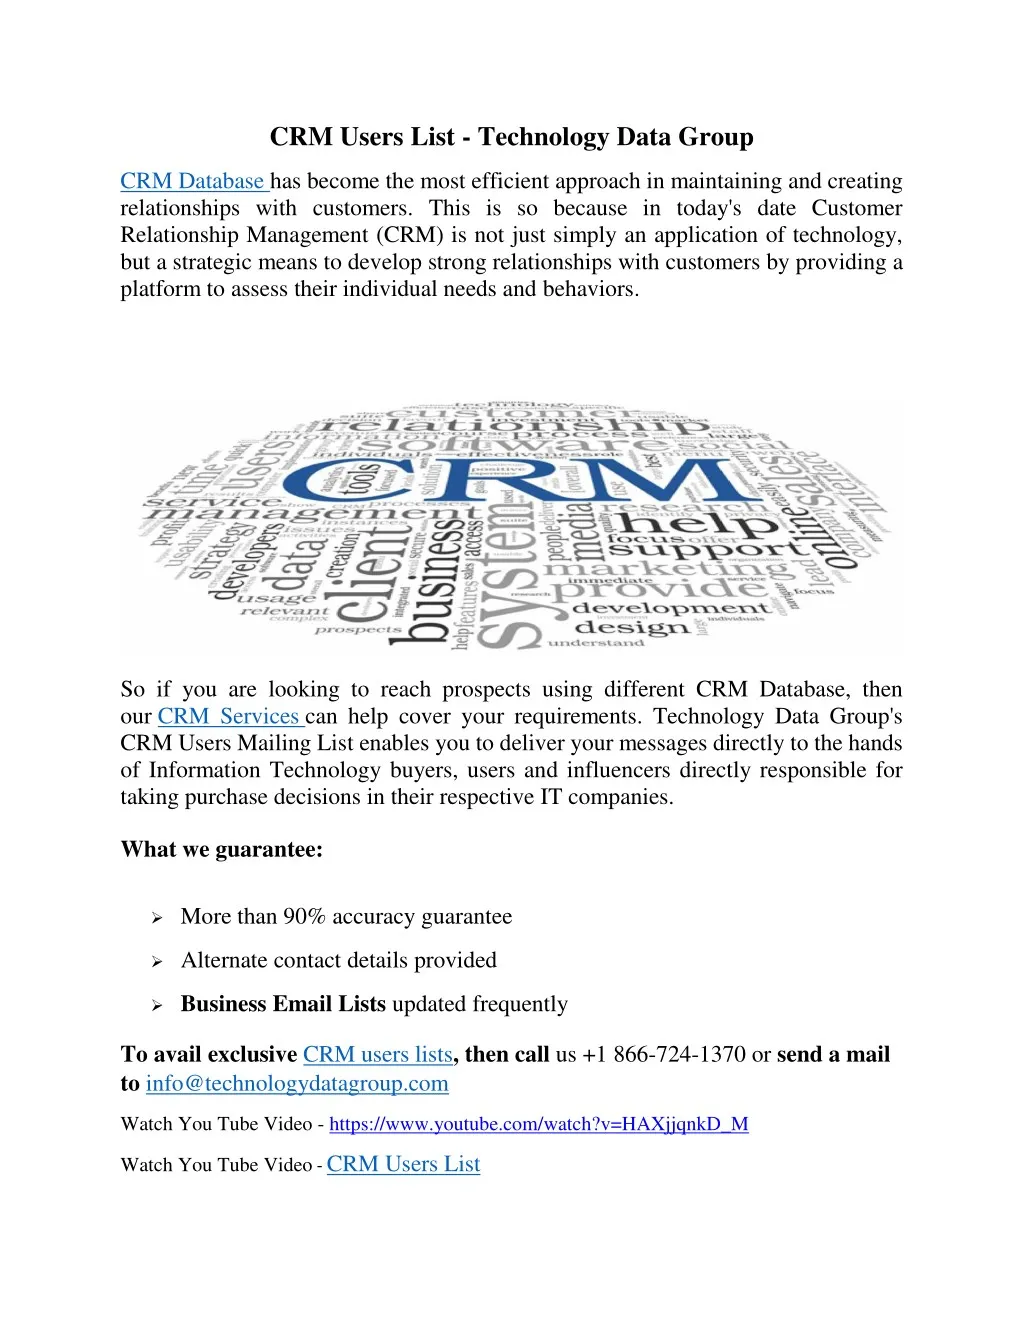 crm users list technology data group